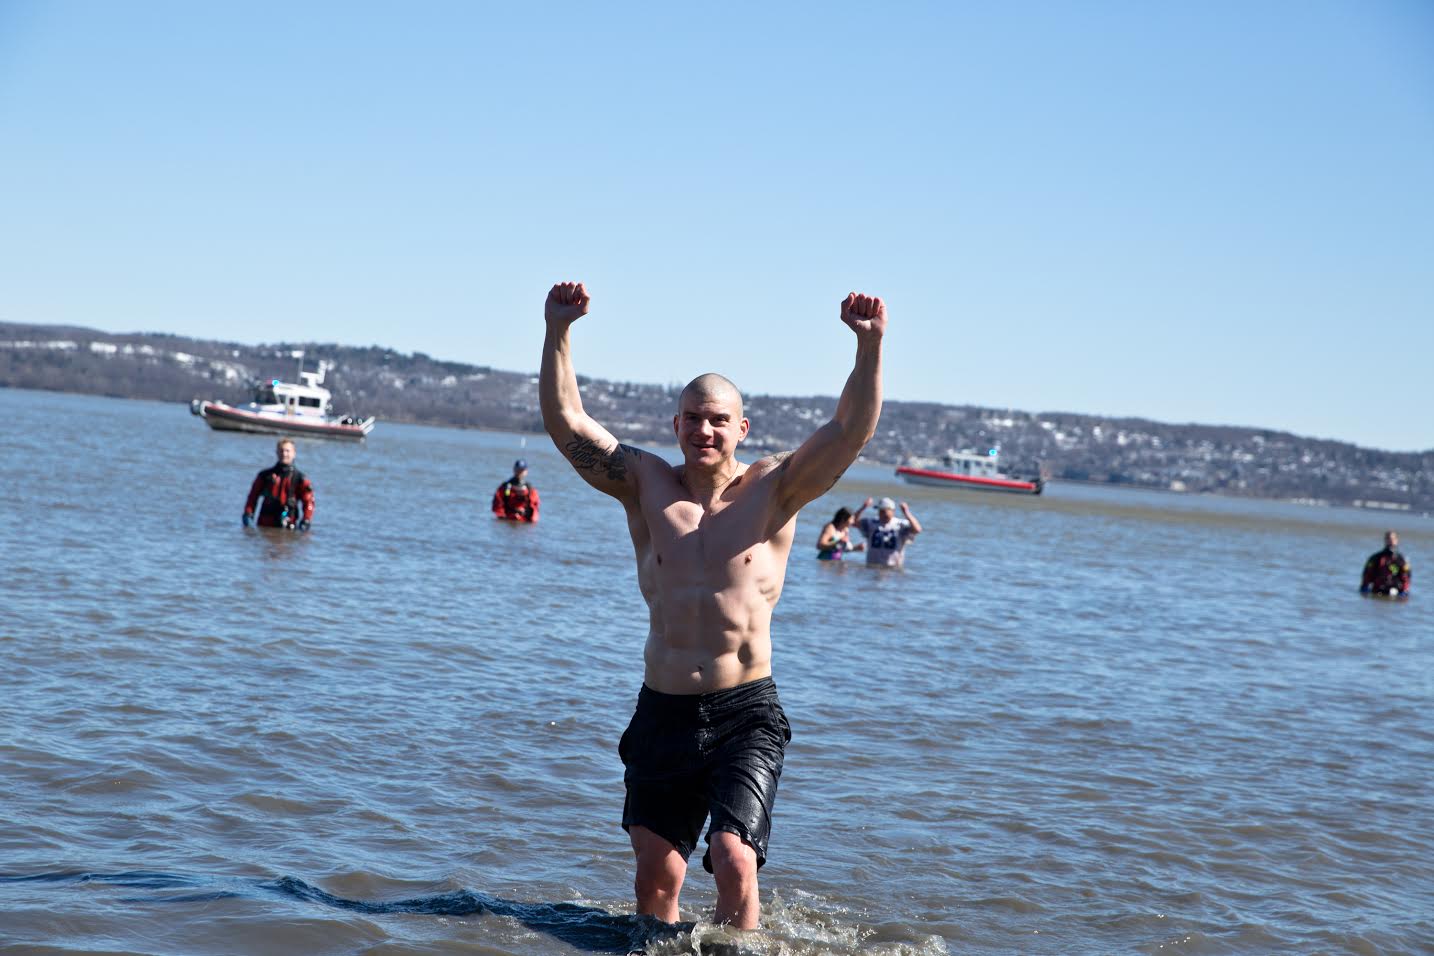 WHO SAYS IT’S COLD? POLAR SWIMMERS STAY WARM BY OPENING THEIR HEARTS TO CHARITY